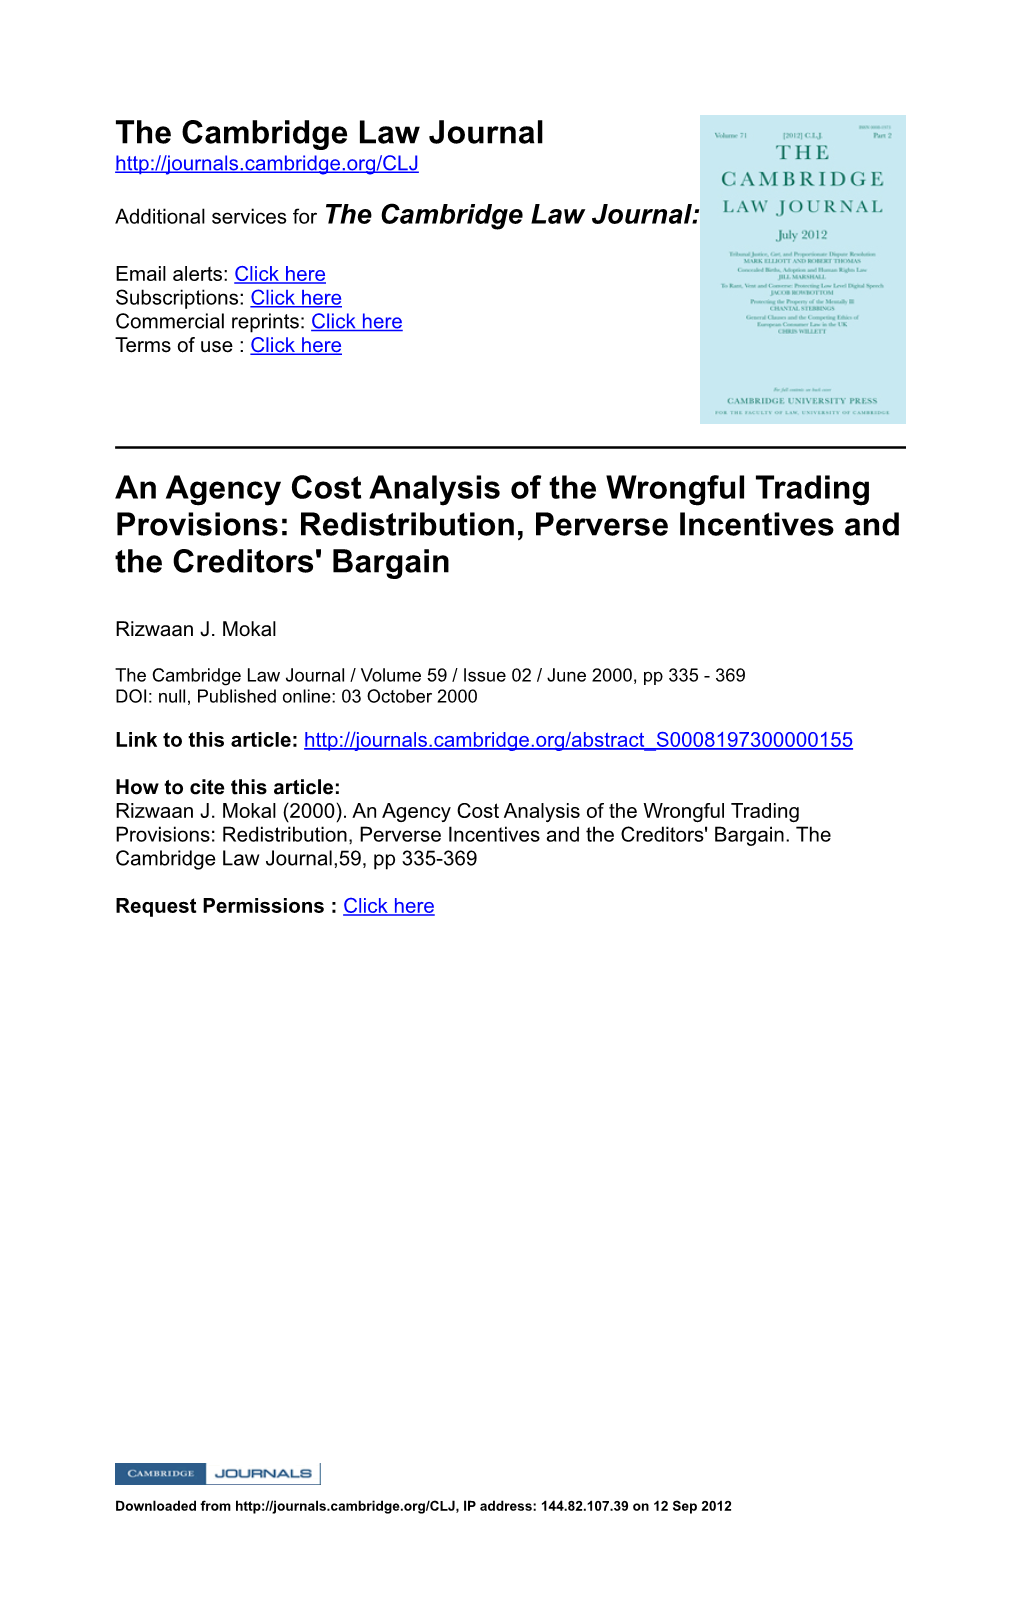 The Cambridge Law Journal an Agency Cost